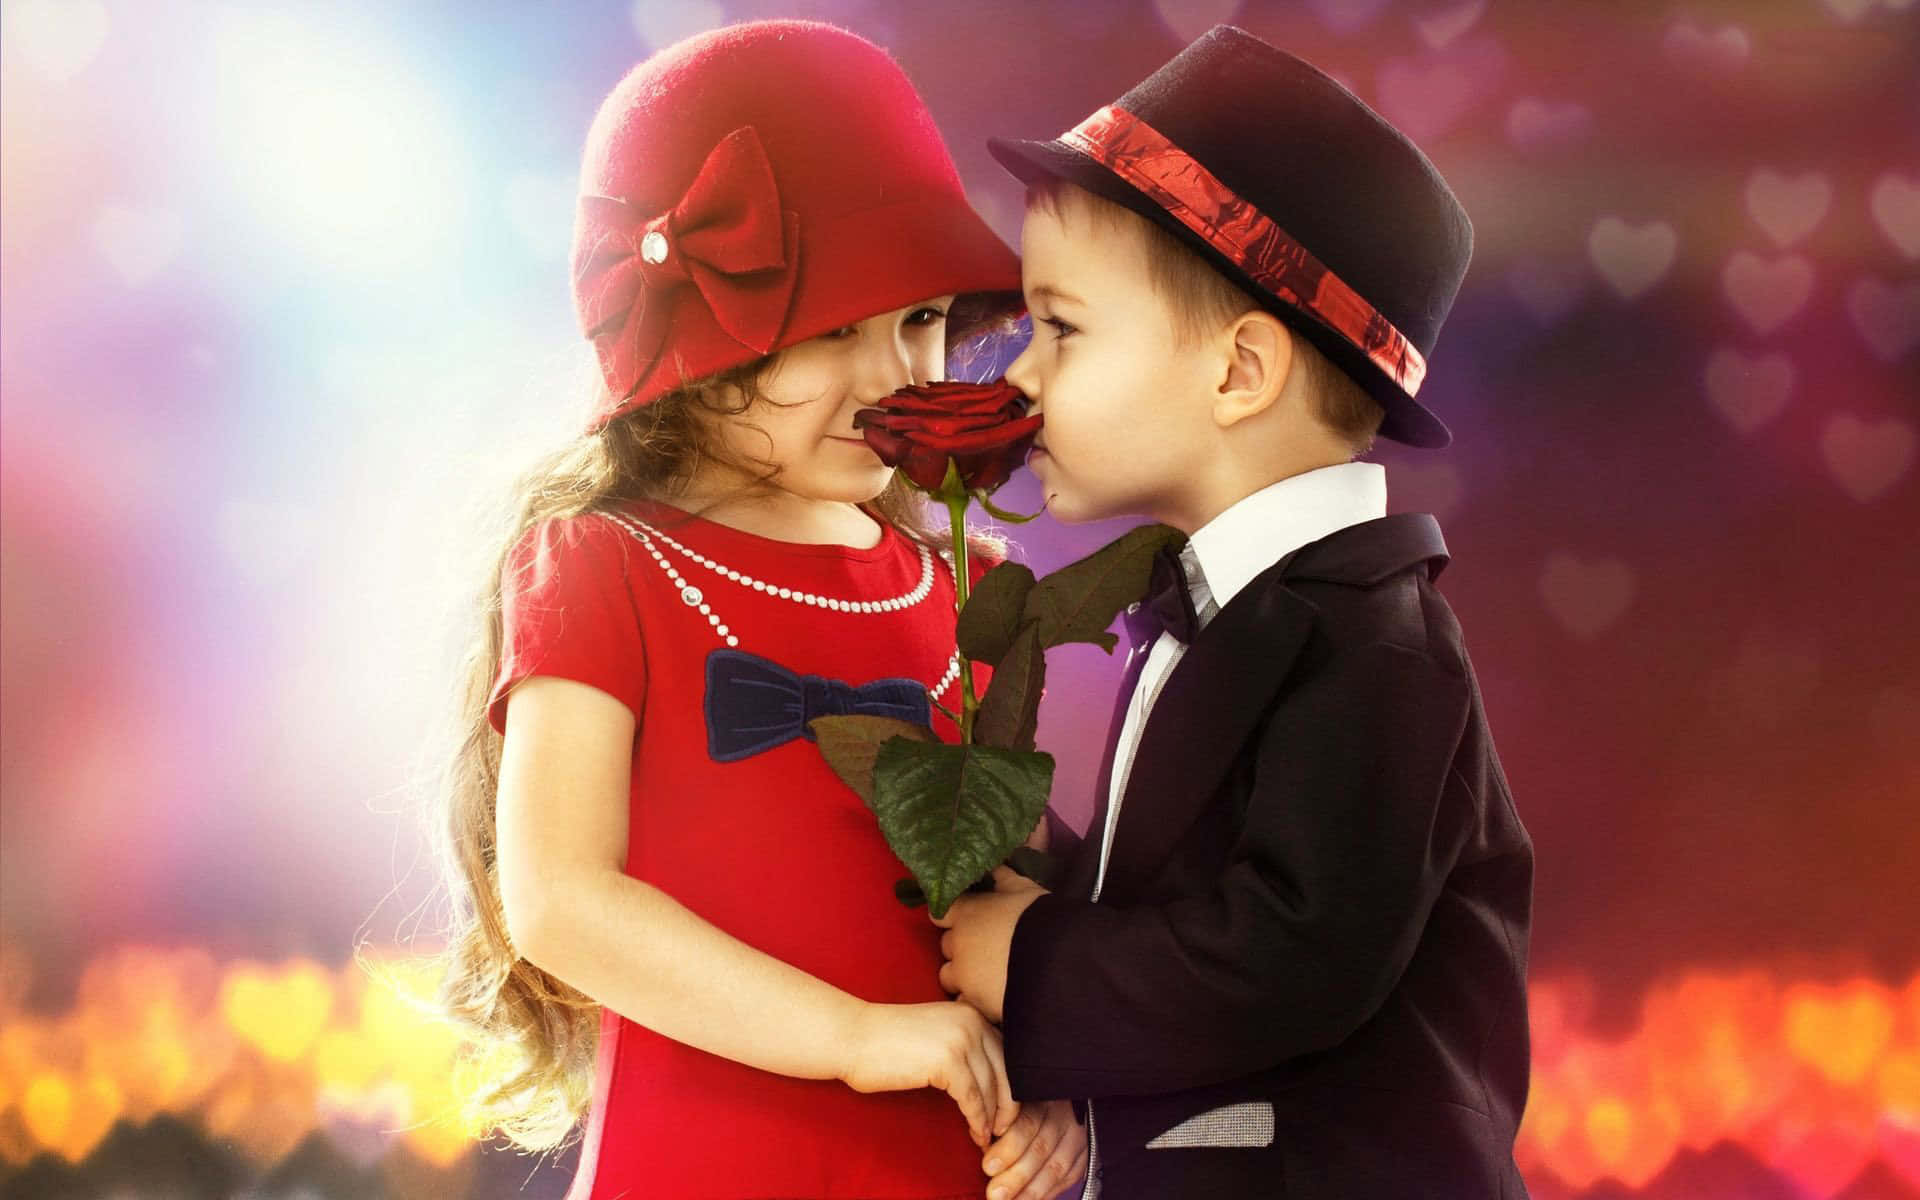 cute child love wallpapers